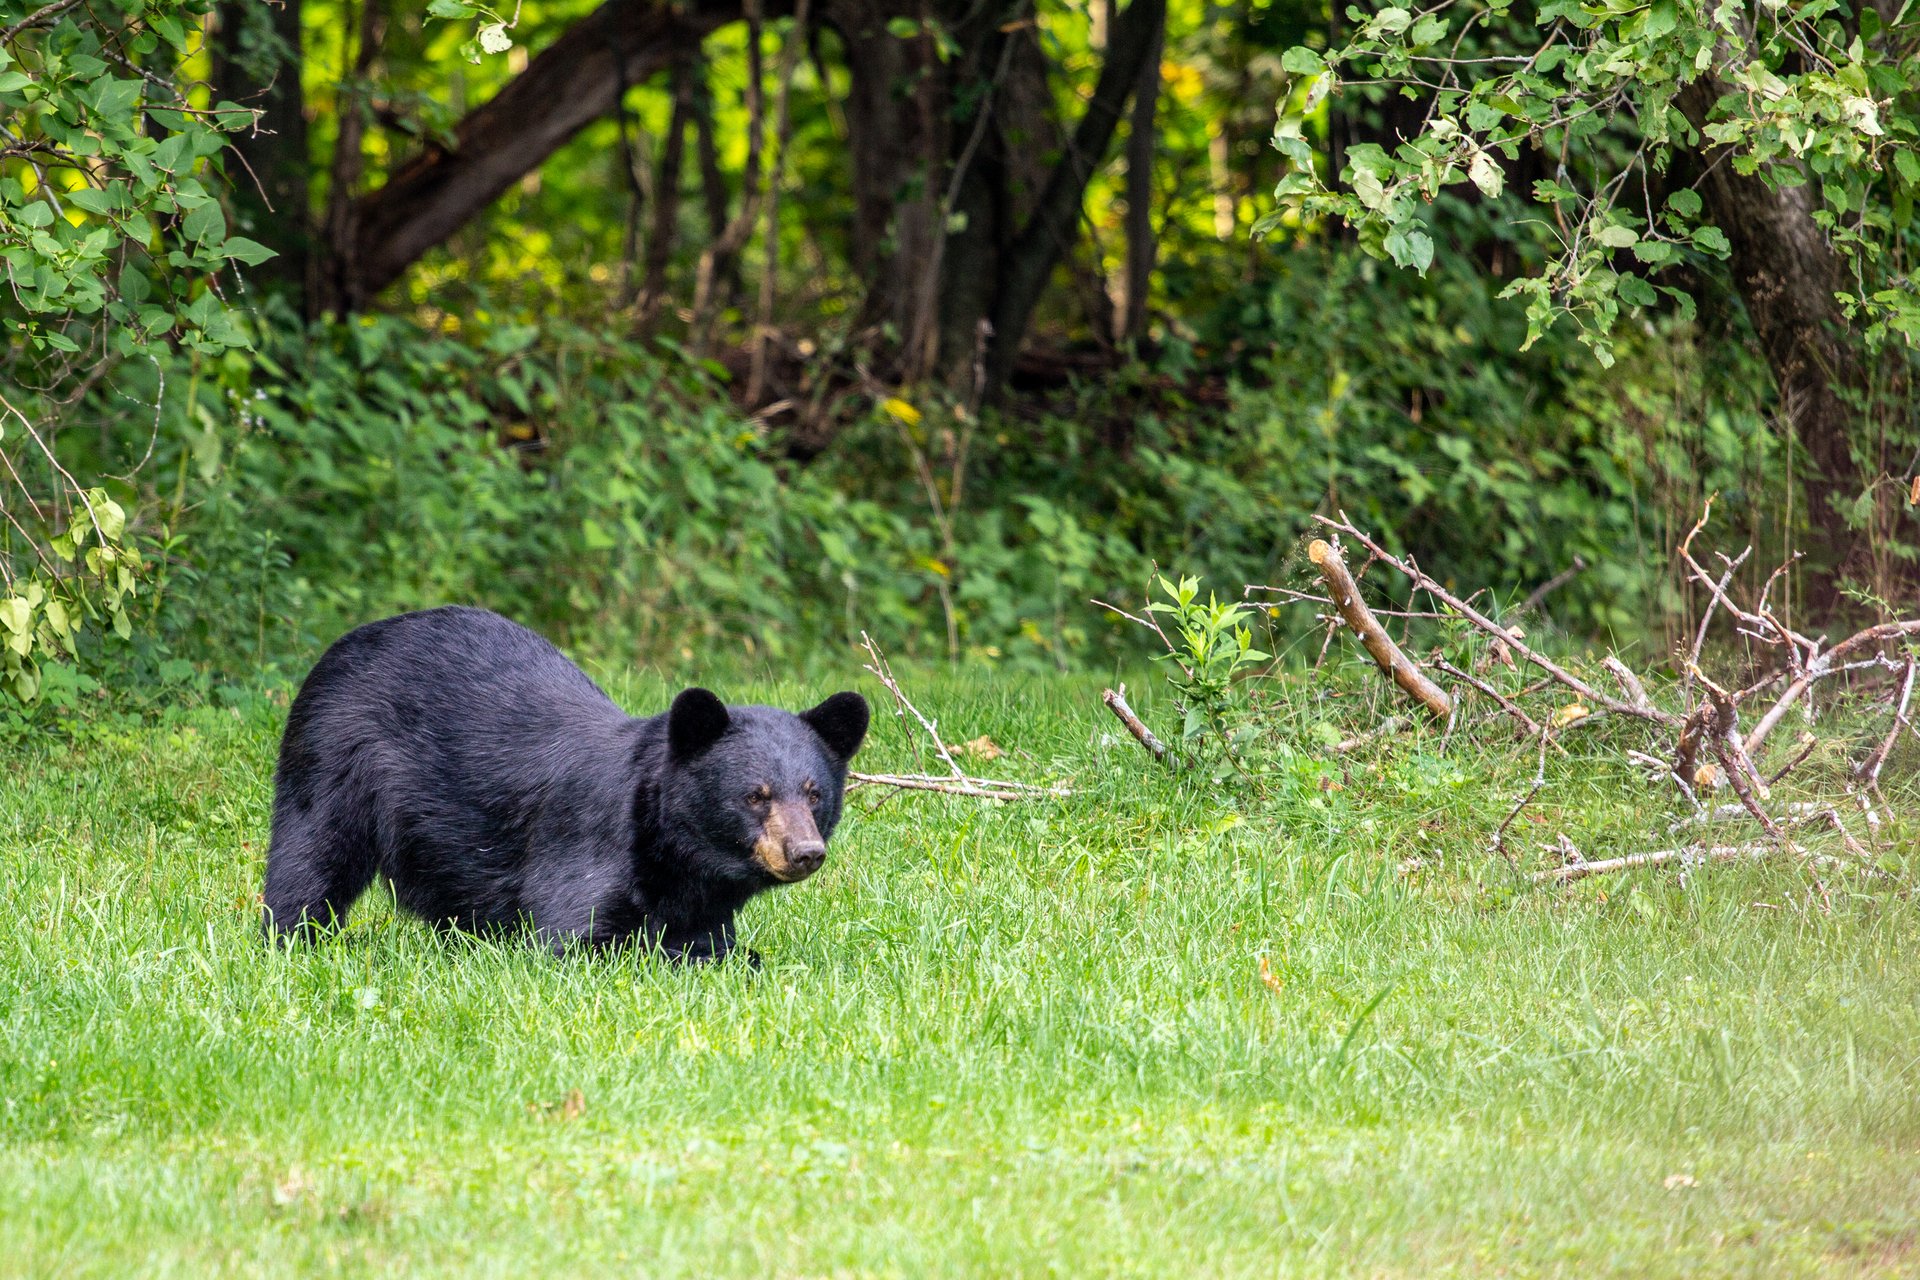 A black bear bent over its front legs in a grassy forest clearing.